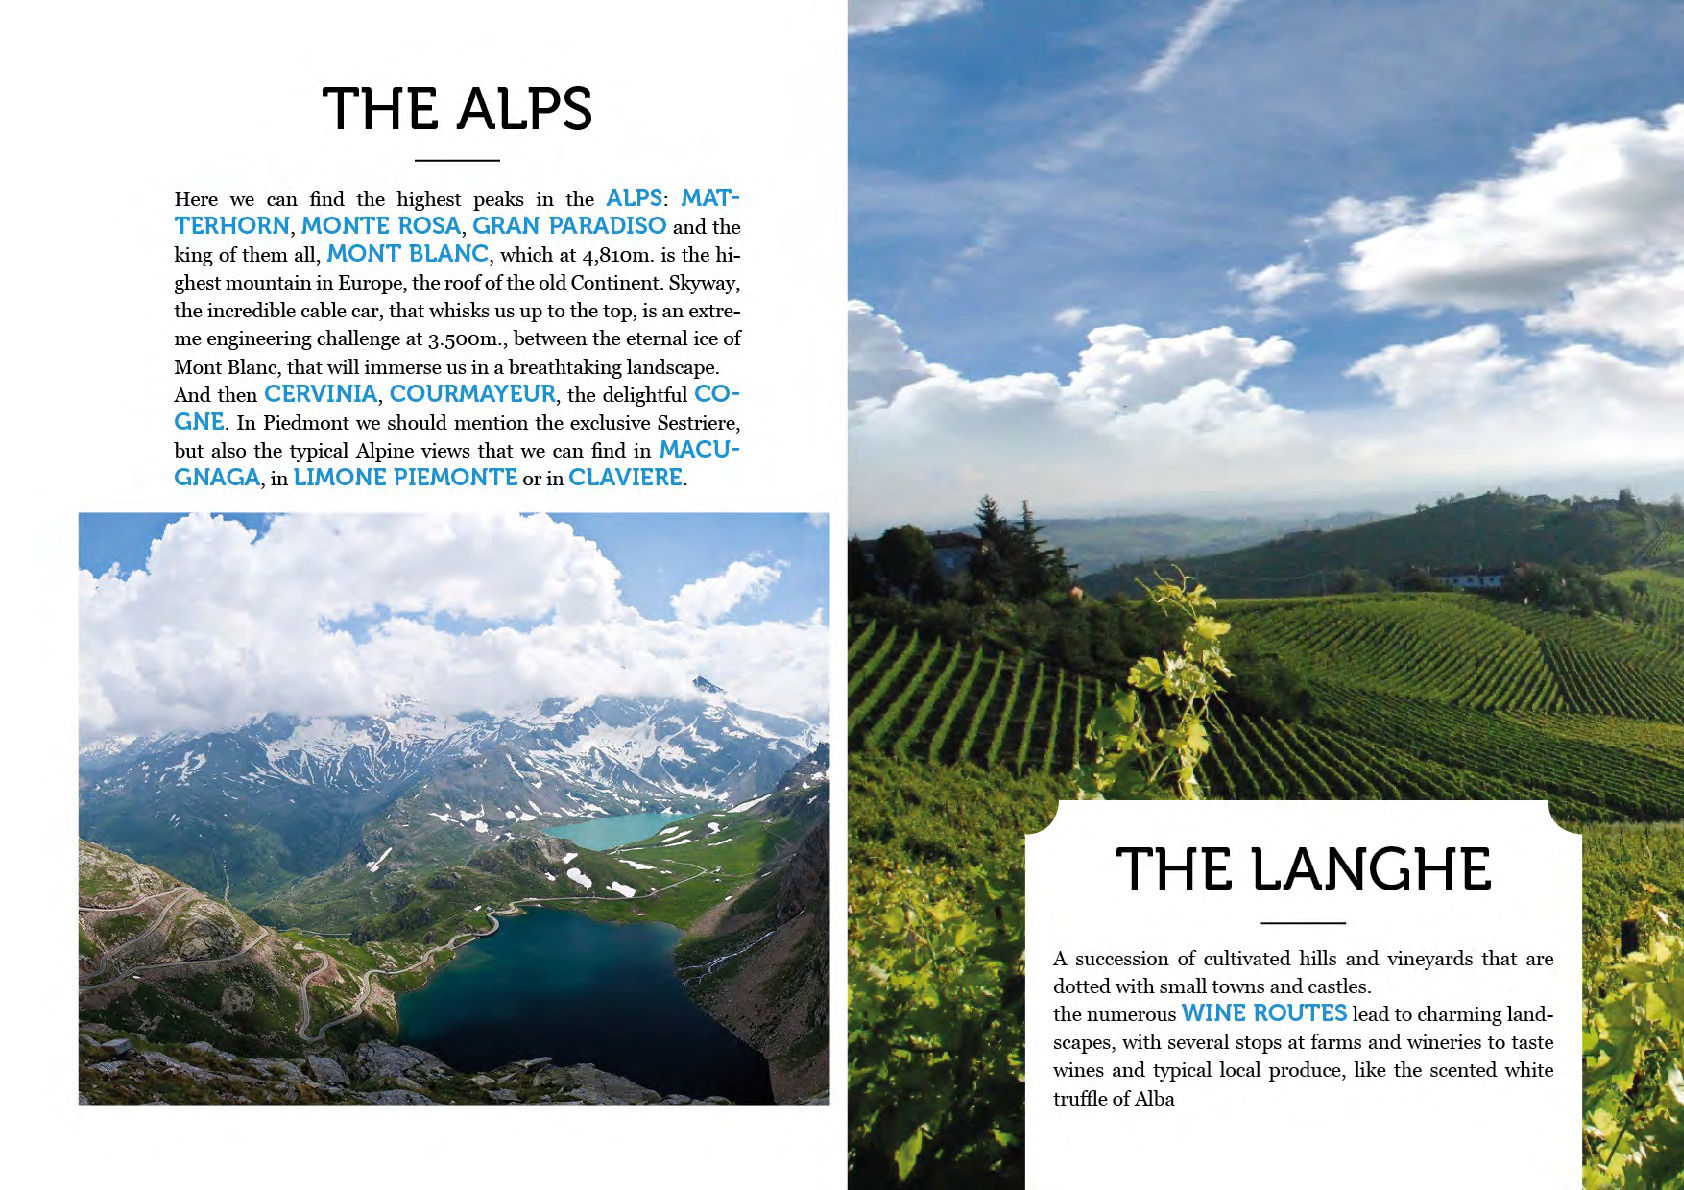 The Alps, Langhe